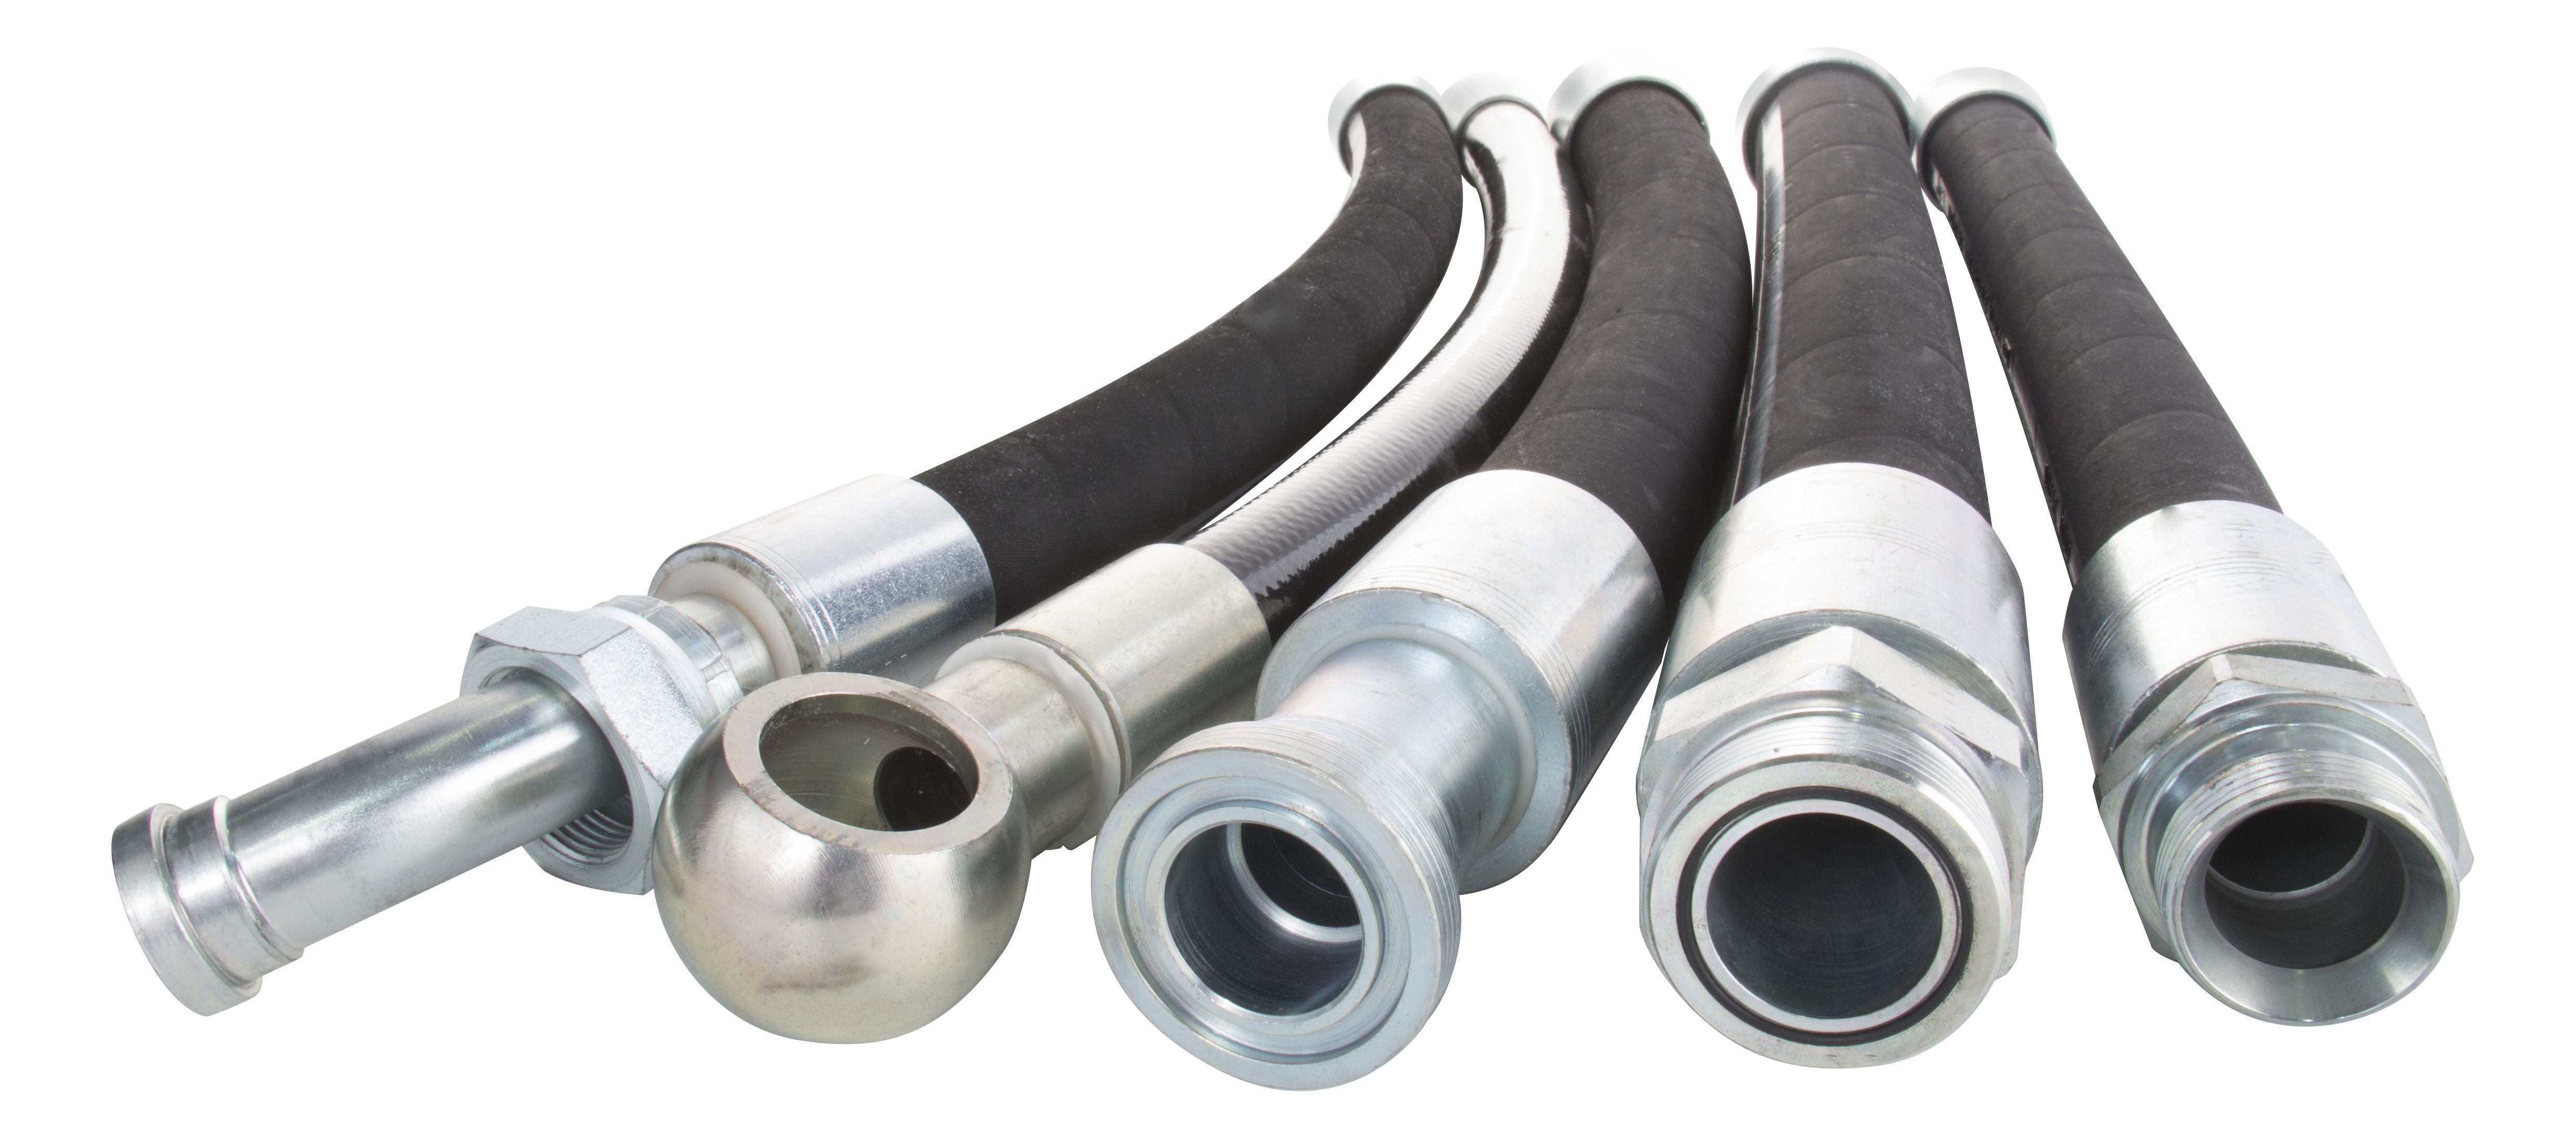 Top Tips For Selecting The Best Hydraulic Hose Service